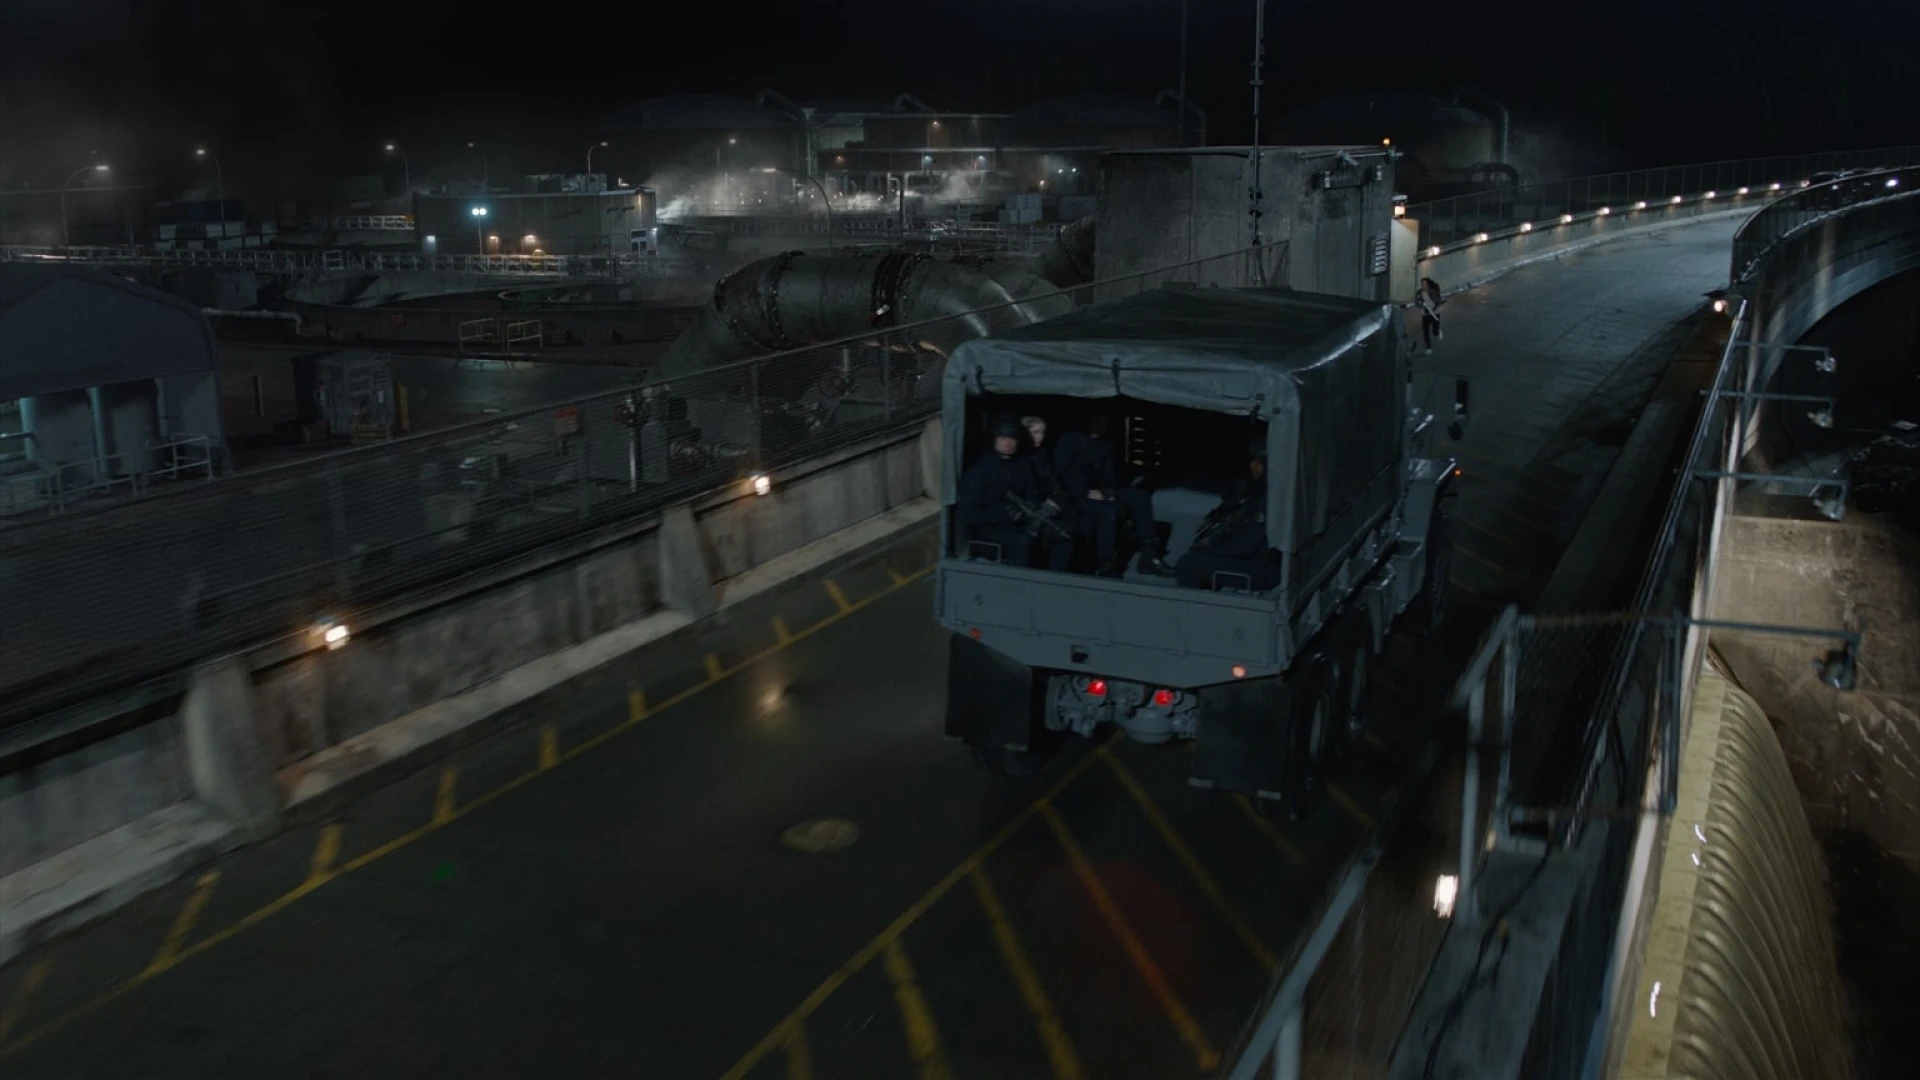 The Predator truck on road view Raynault vfx